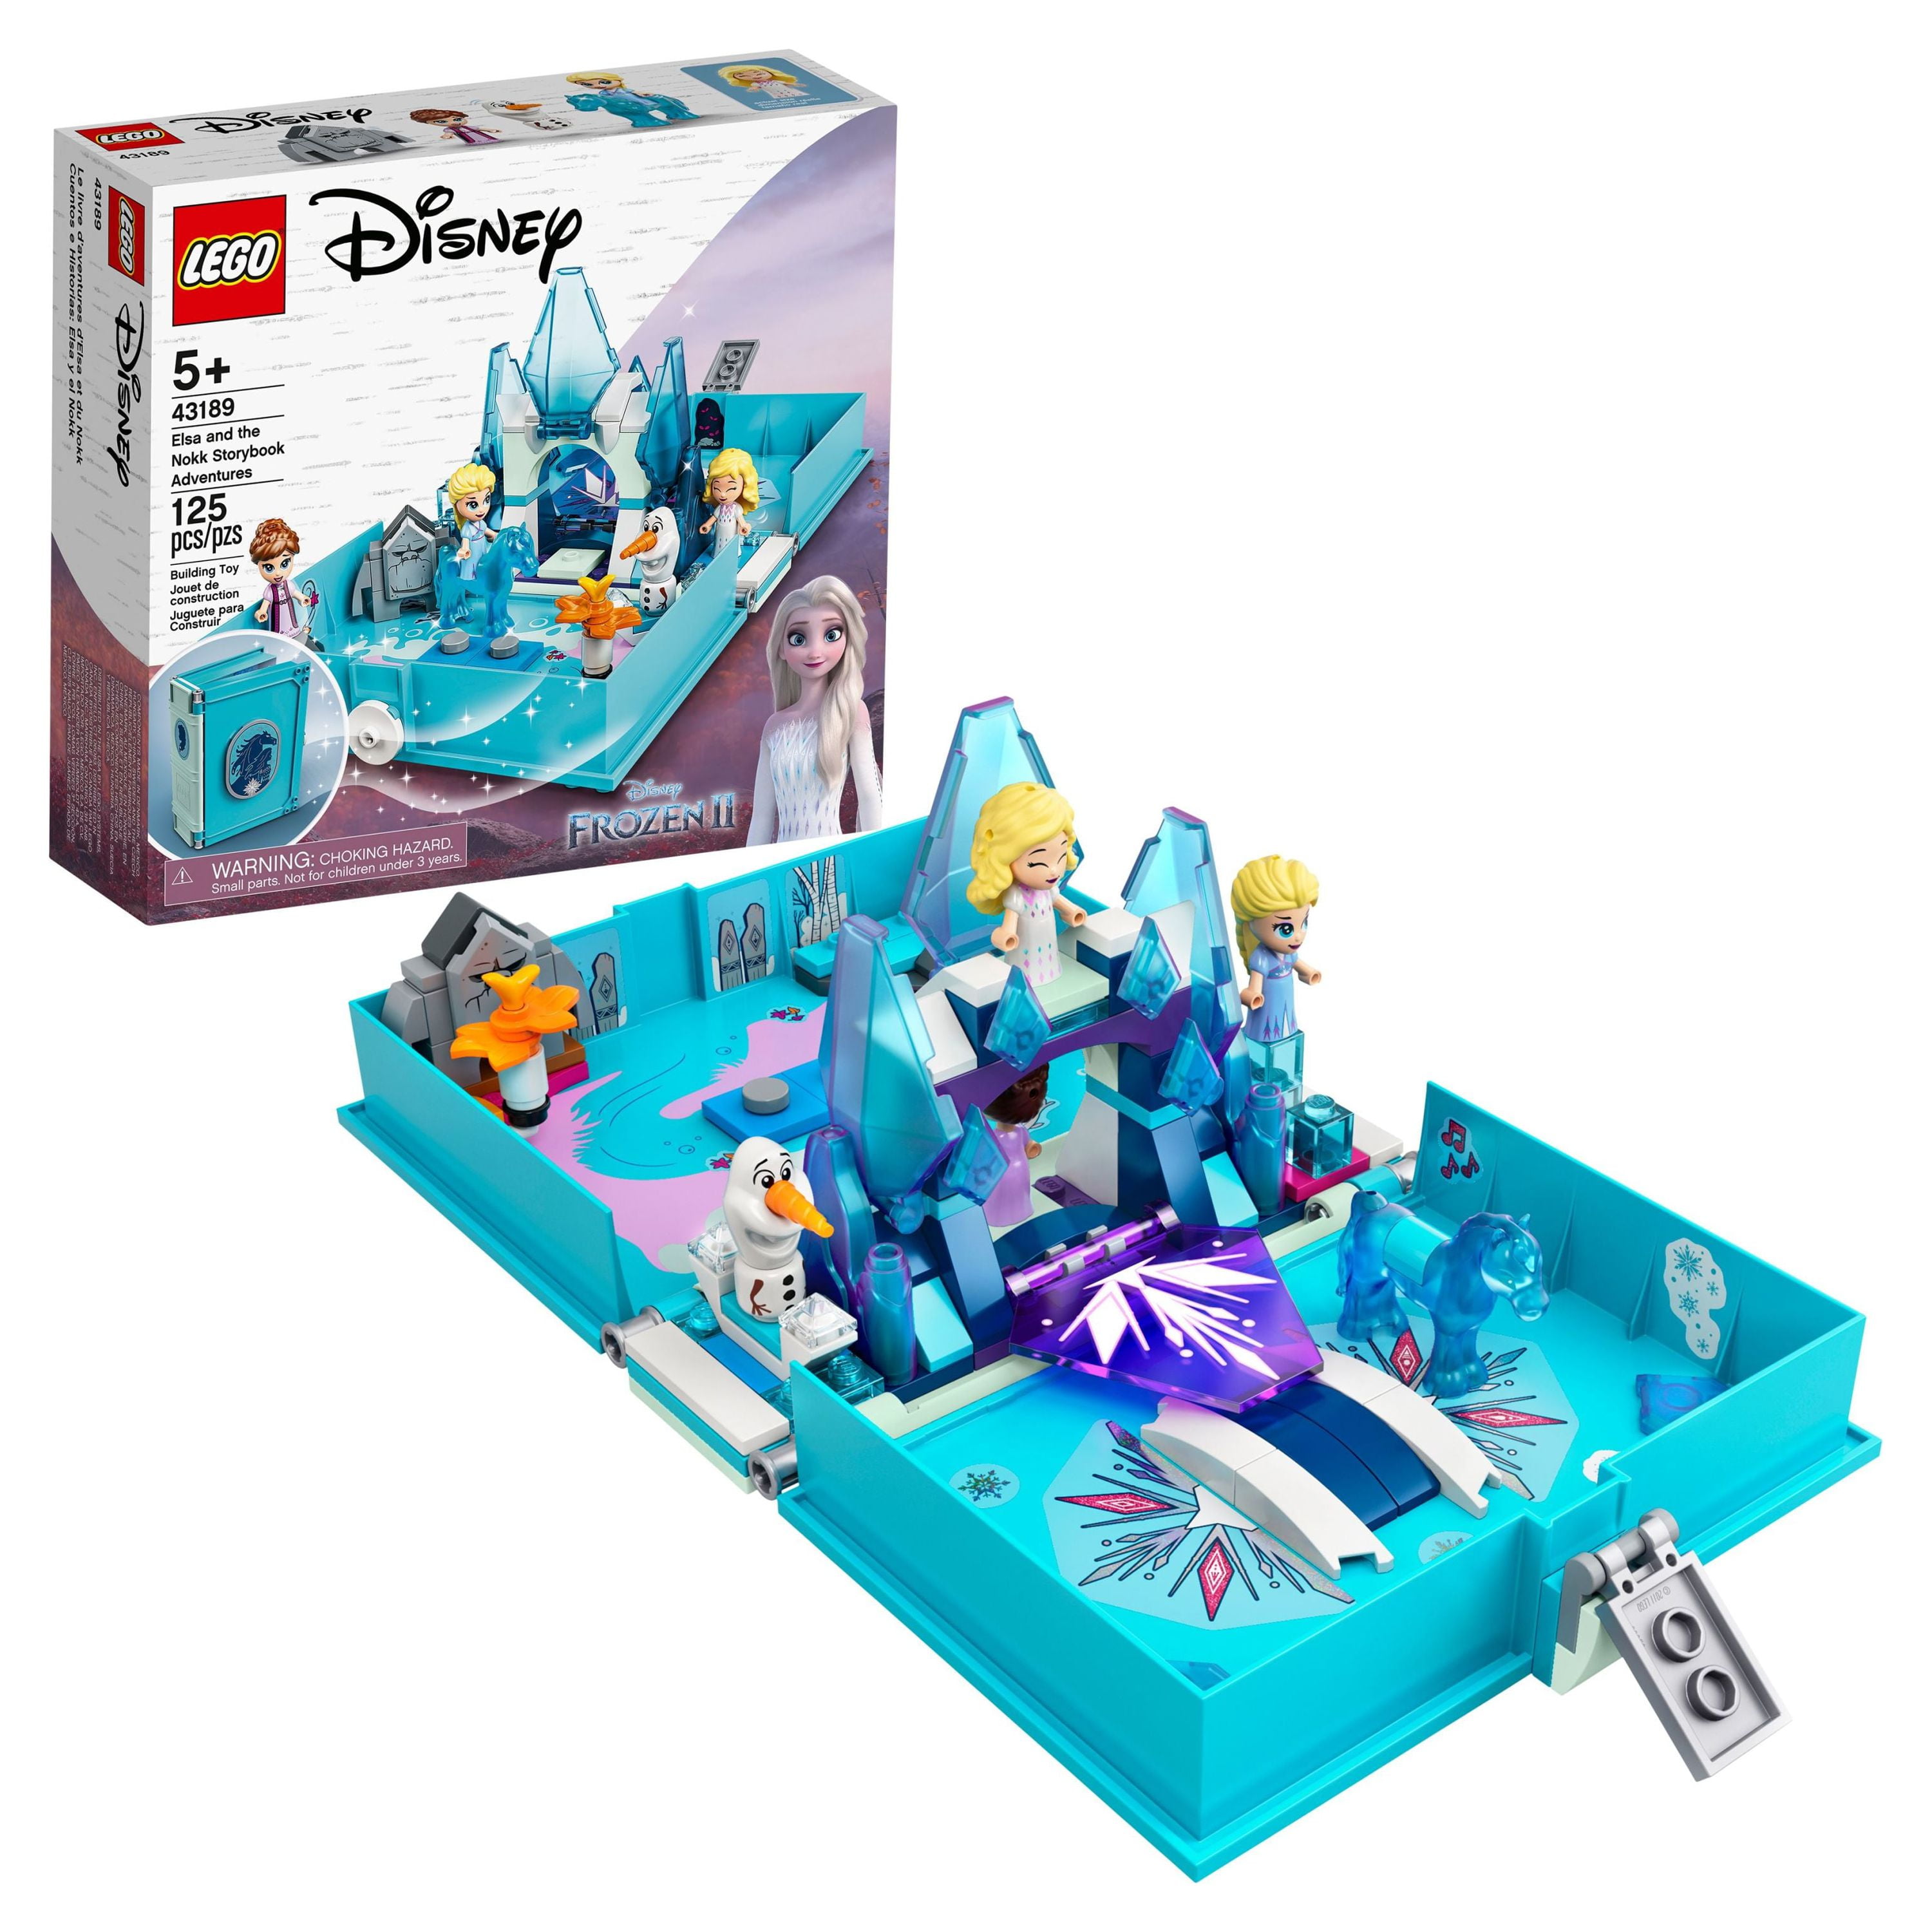 LEGO Disney Frozen 2 Elsa and the Nokk Storybook Adventures 43189, Disney  Princess Toy Playset Perfect for Travel, Gifts for 5 Plus Year Old Kids,  Girls & Boys with Micro Doll